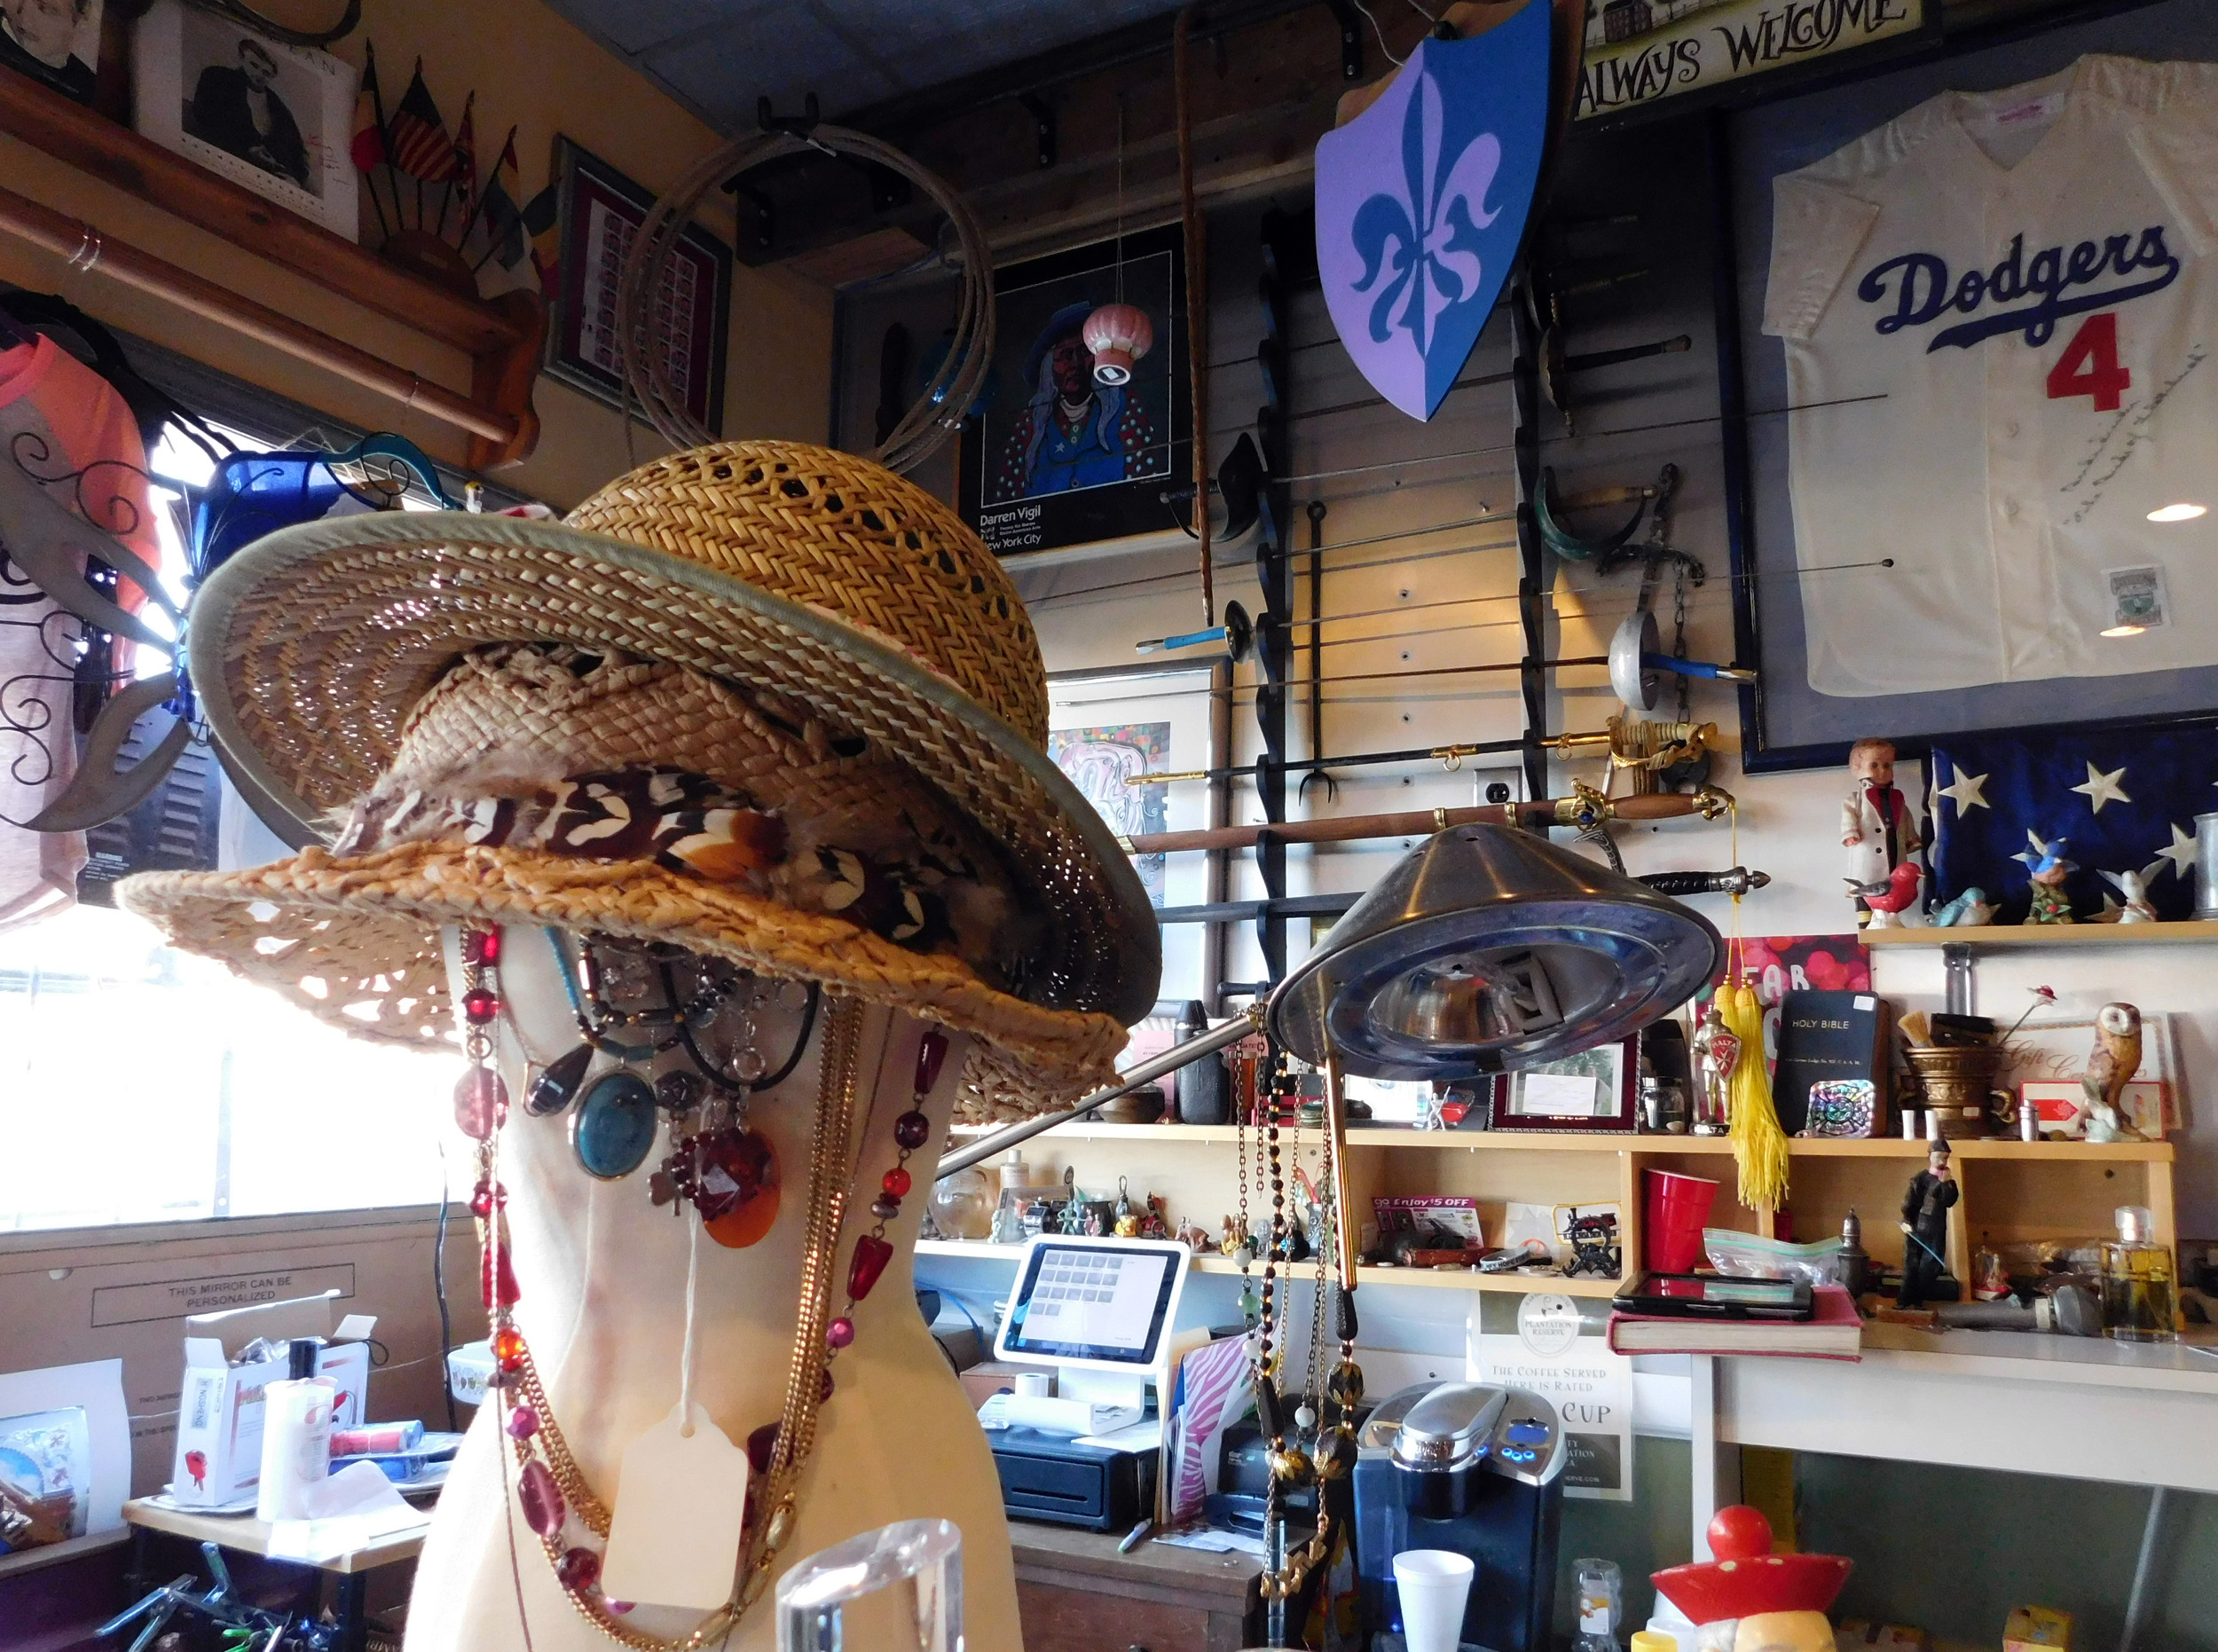 Anything from vintage clothing to jewelry, sports memorabilia and antique weapons can be found tucked away in some corner of the Long Island Trading Post.